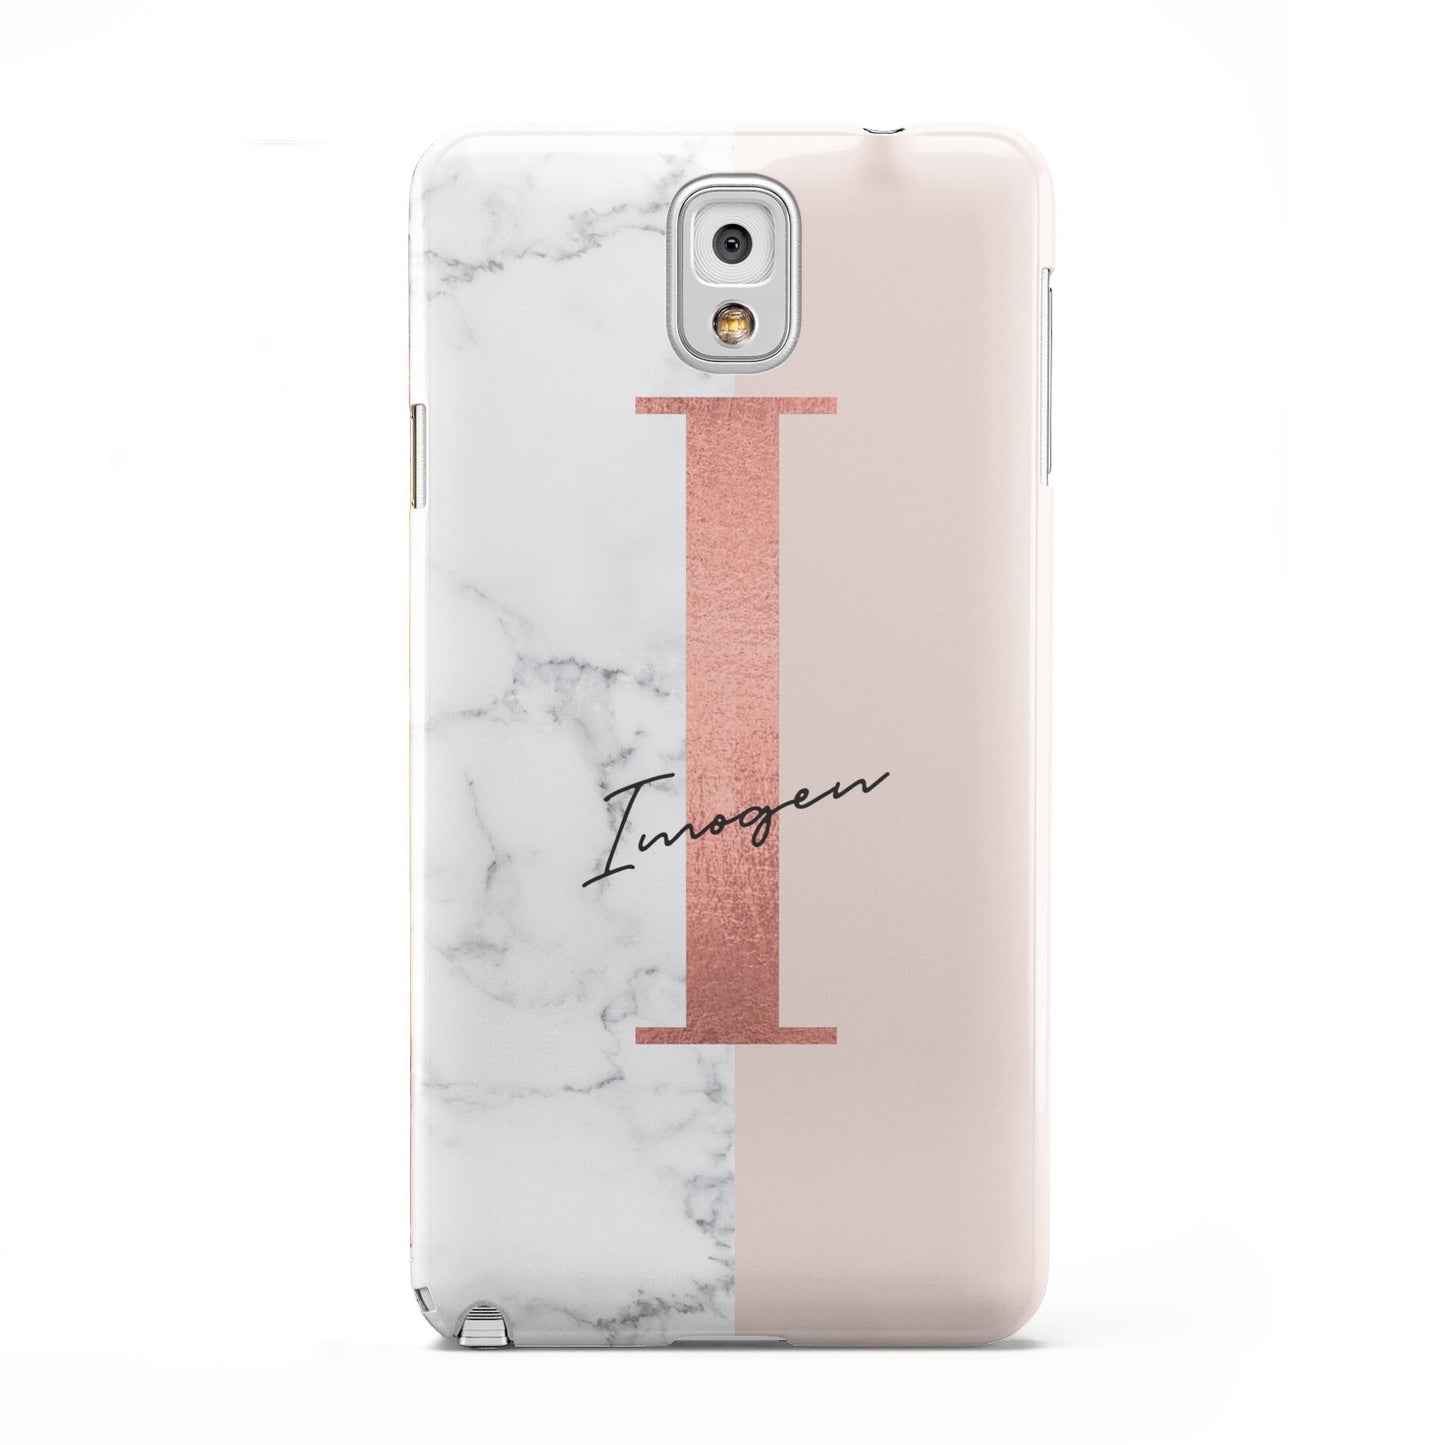 Monogrammed Rose Gold Marble Samsung Galaxy Note 3 Case